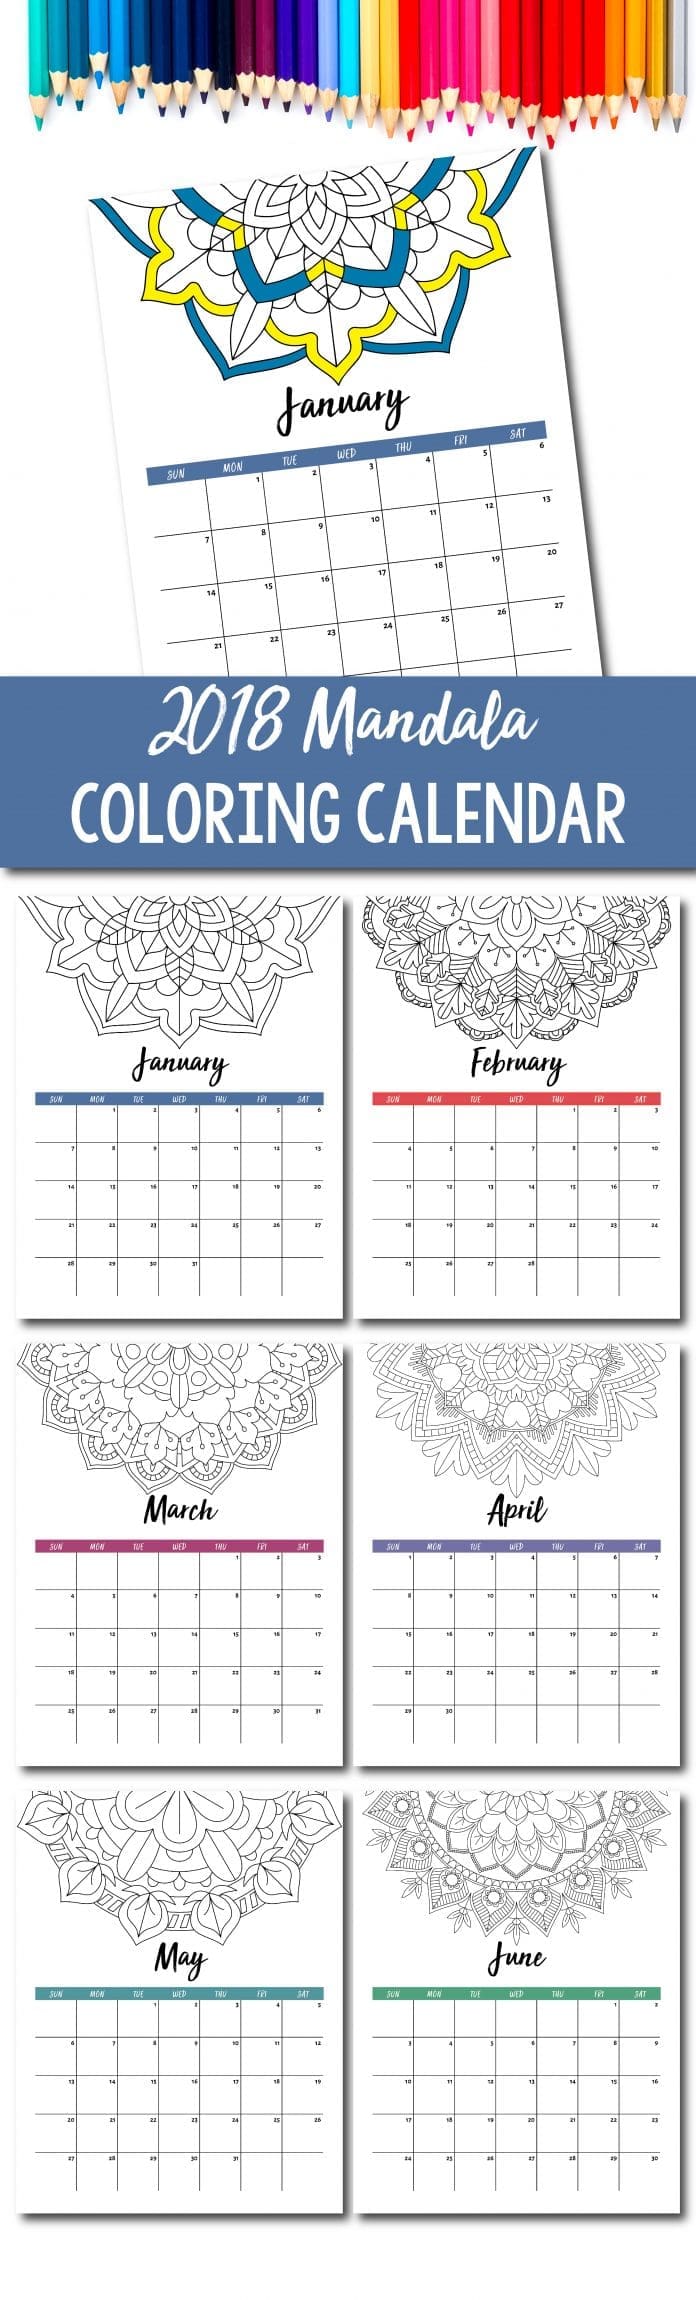 Why Hello 2018 - I hope you are going to be a good one.  Well to help you start the year in a great way I have this fun fab and free 2018 Mandela Calendar for you to download and colour in. Perfect for keeping you on track.